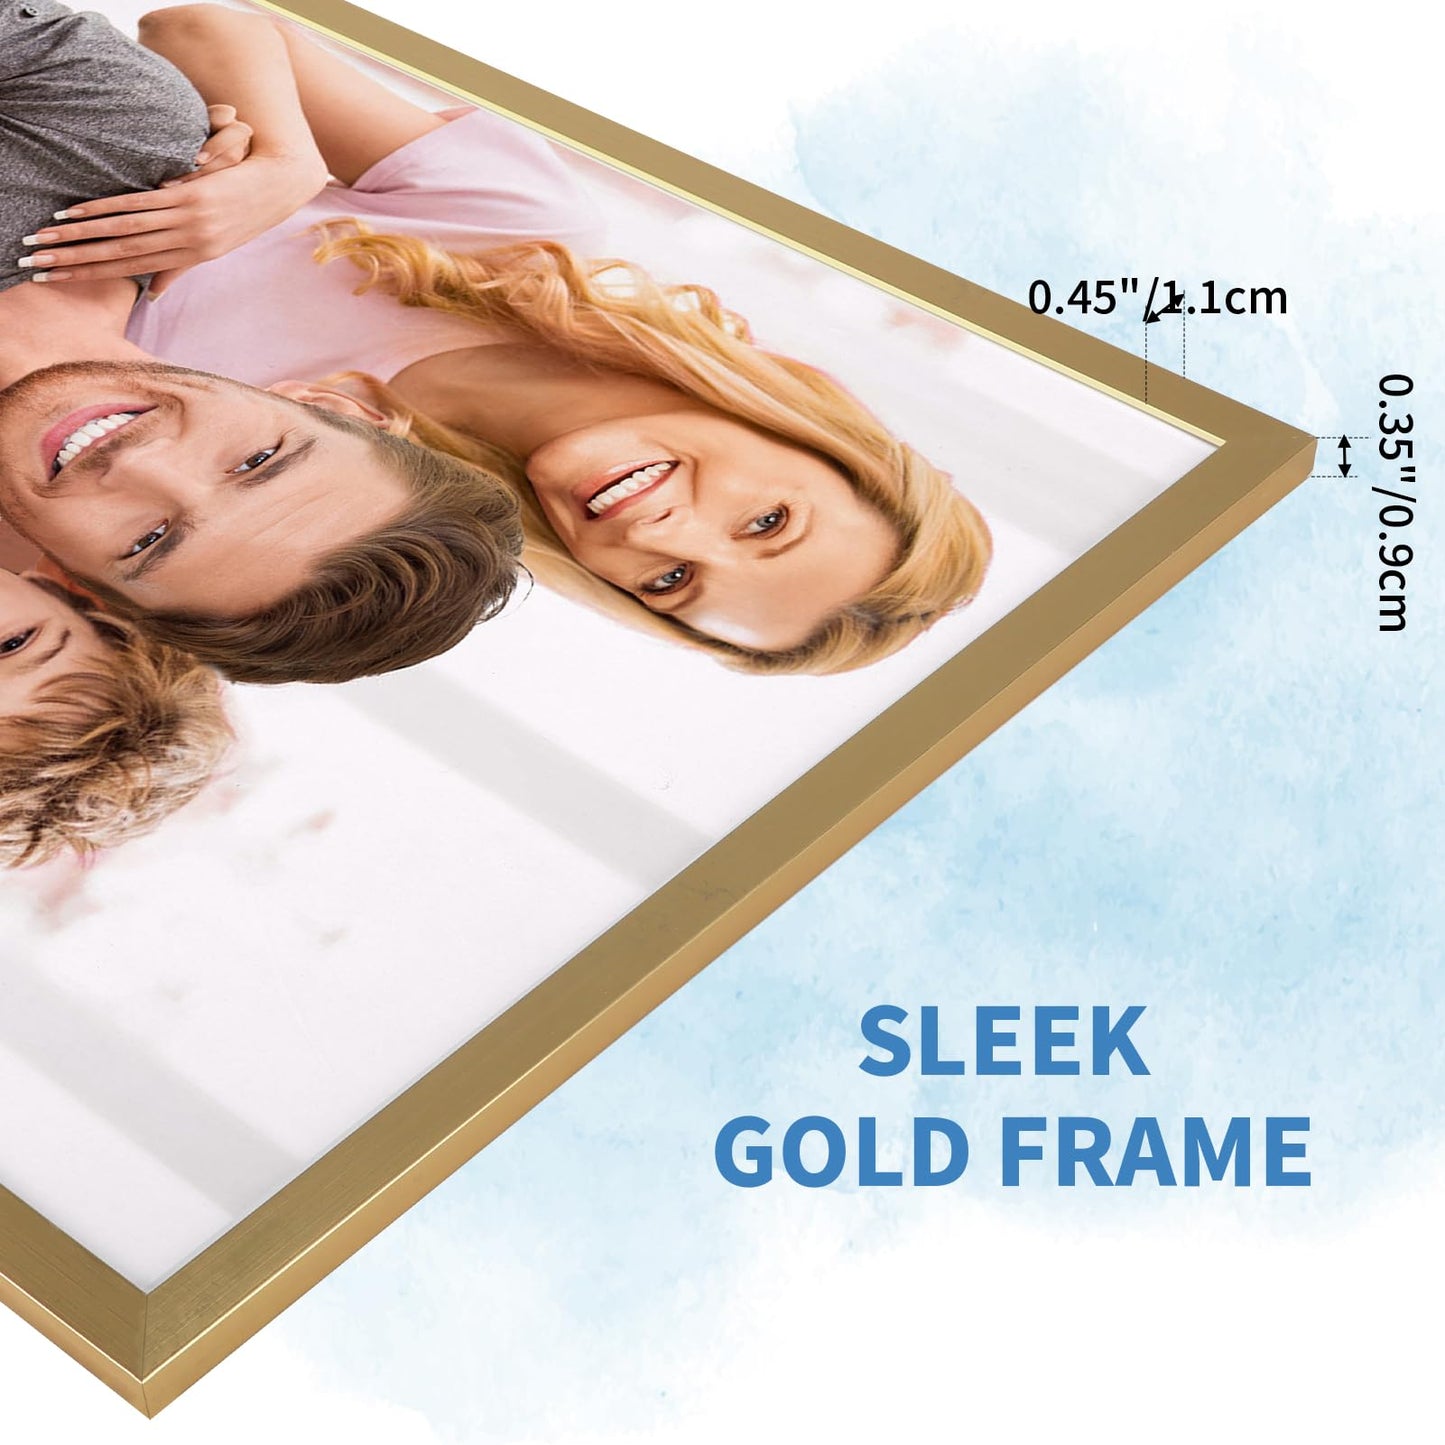 WIFTREY 11x14 Gold Picture Frames, Rustic 11 x 14 Photo Frame Bulk for Wall Hanging, Tabletop Display, 18 Pack